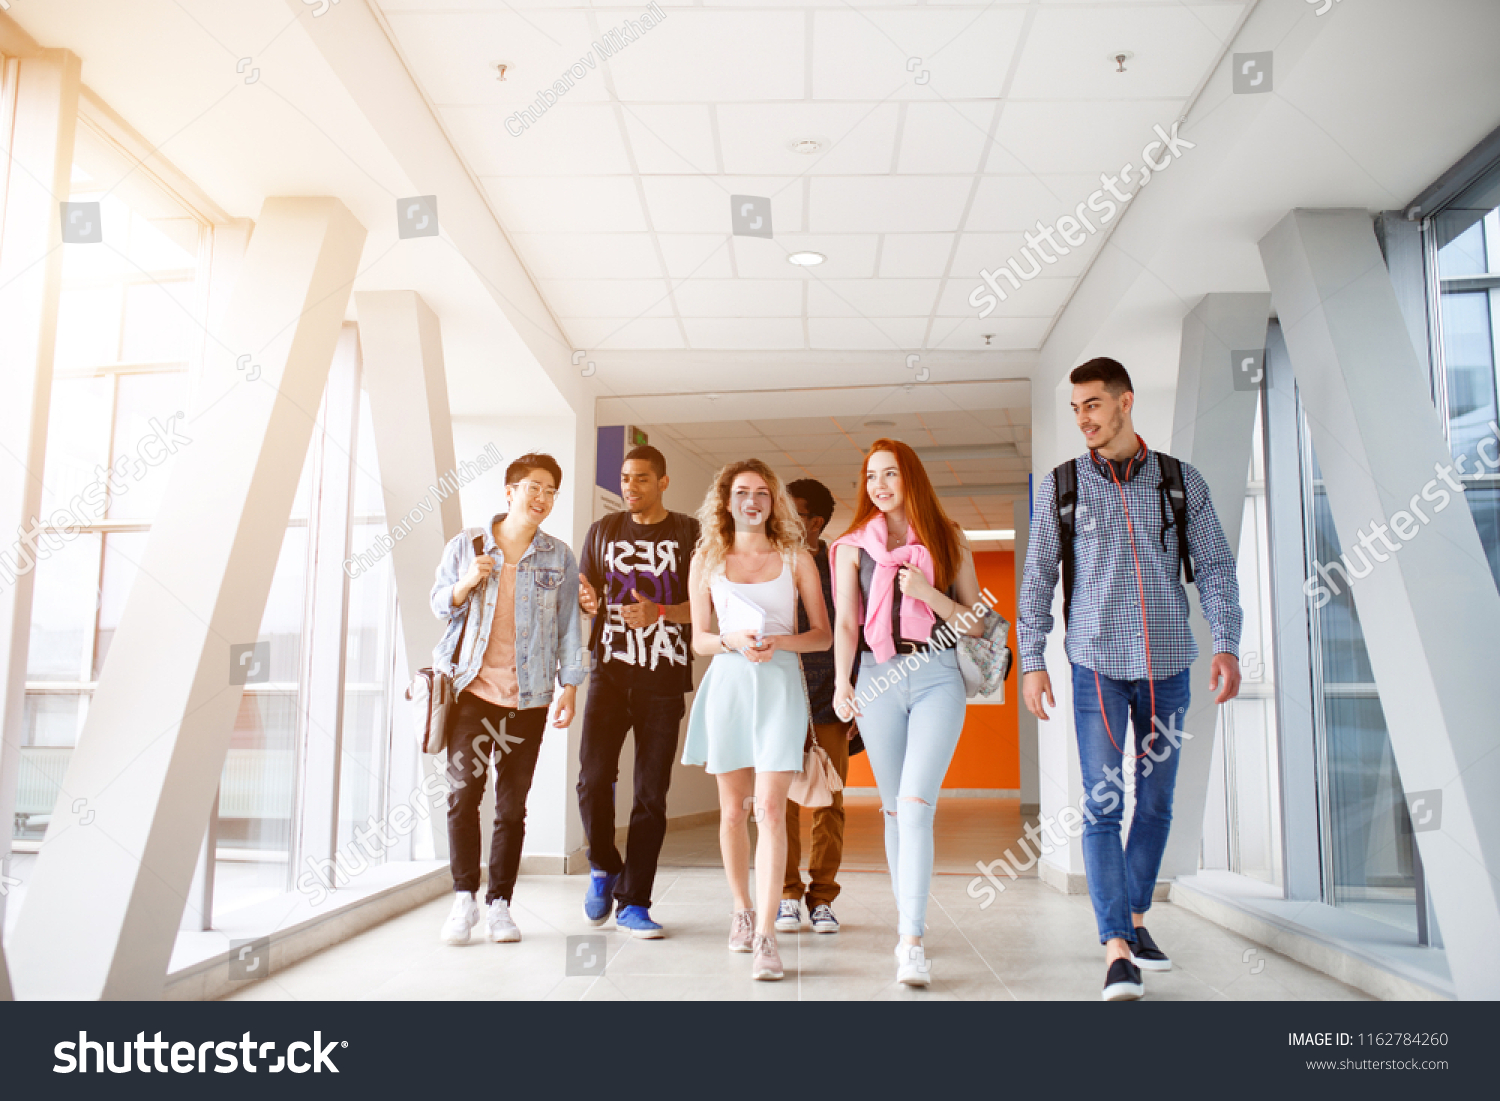 A group of young students from different countries go to classes. The photo illustrates education, College, school, or University. #1162784260